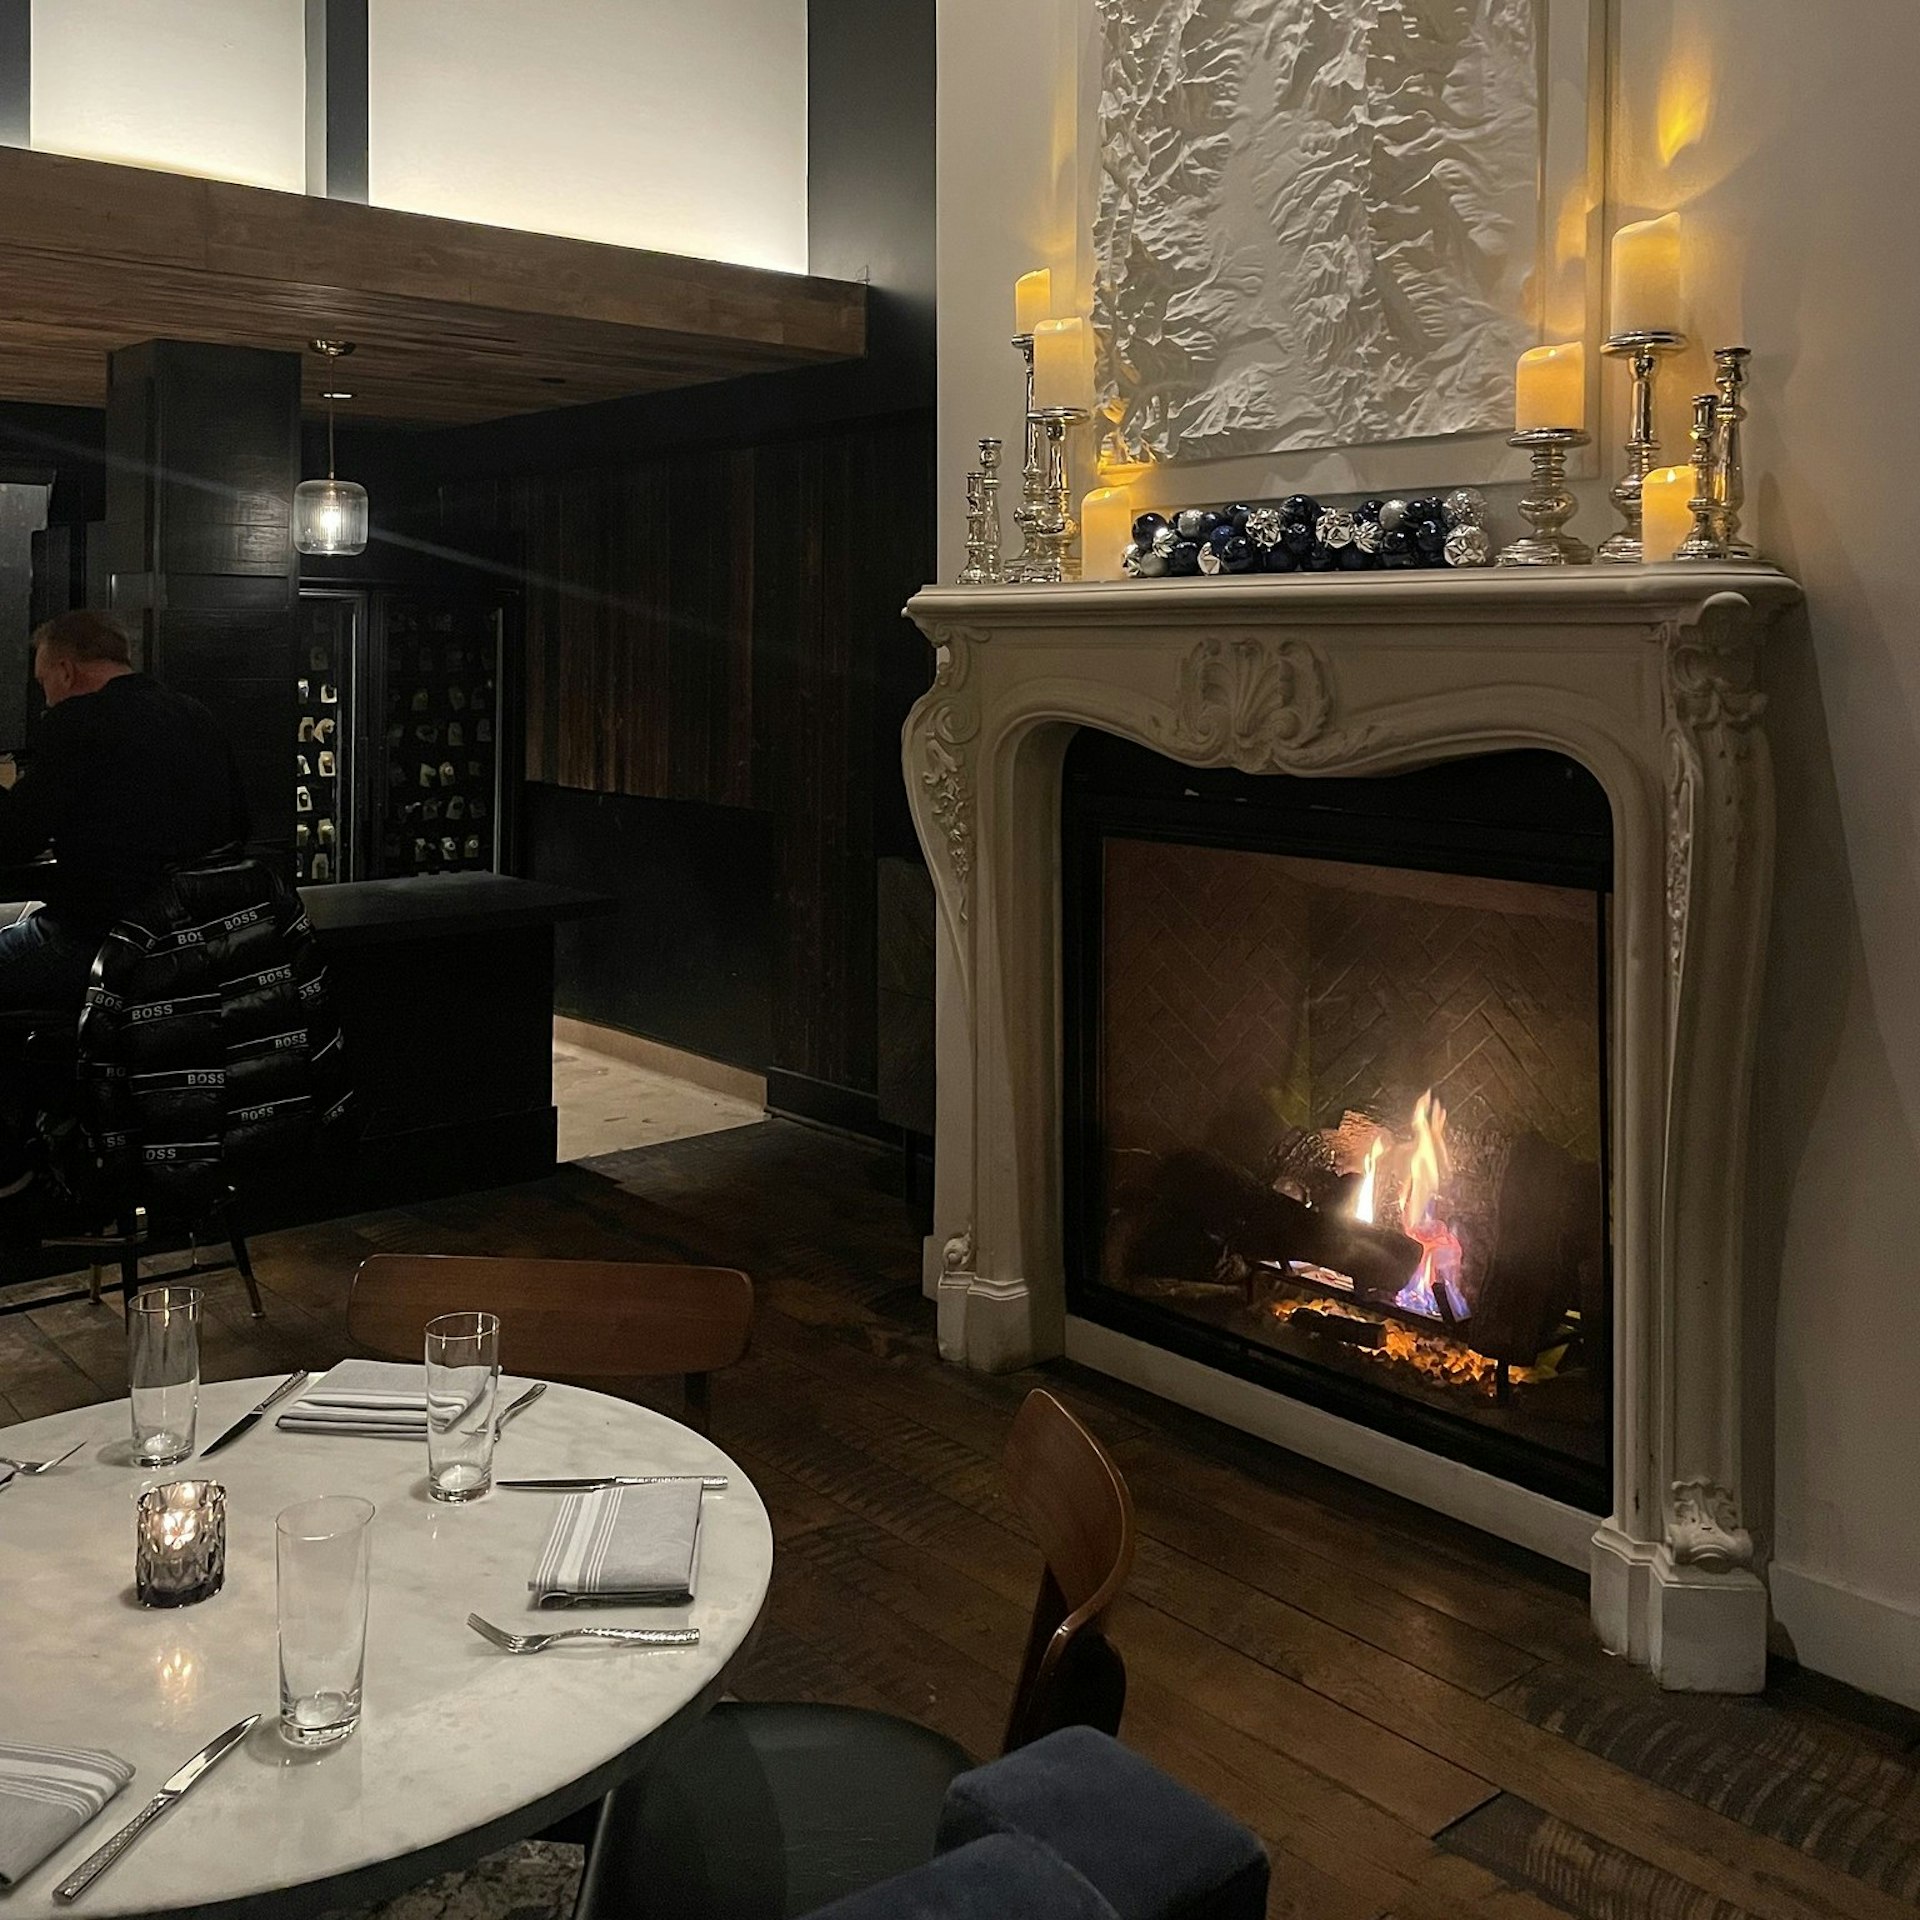 Fireplace and table at The Slope Room, Vail, Colorado, USA